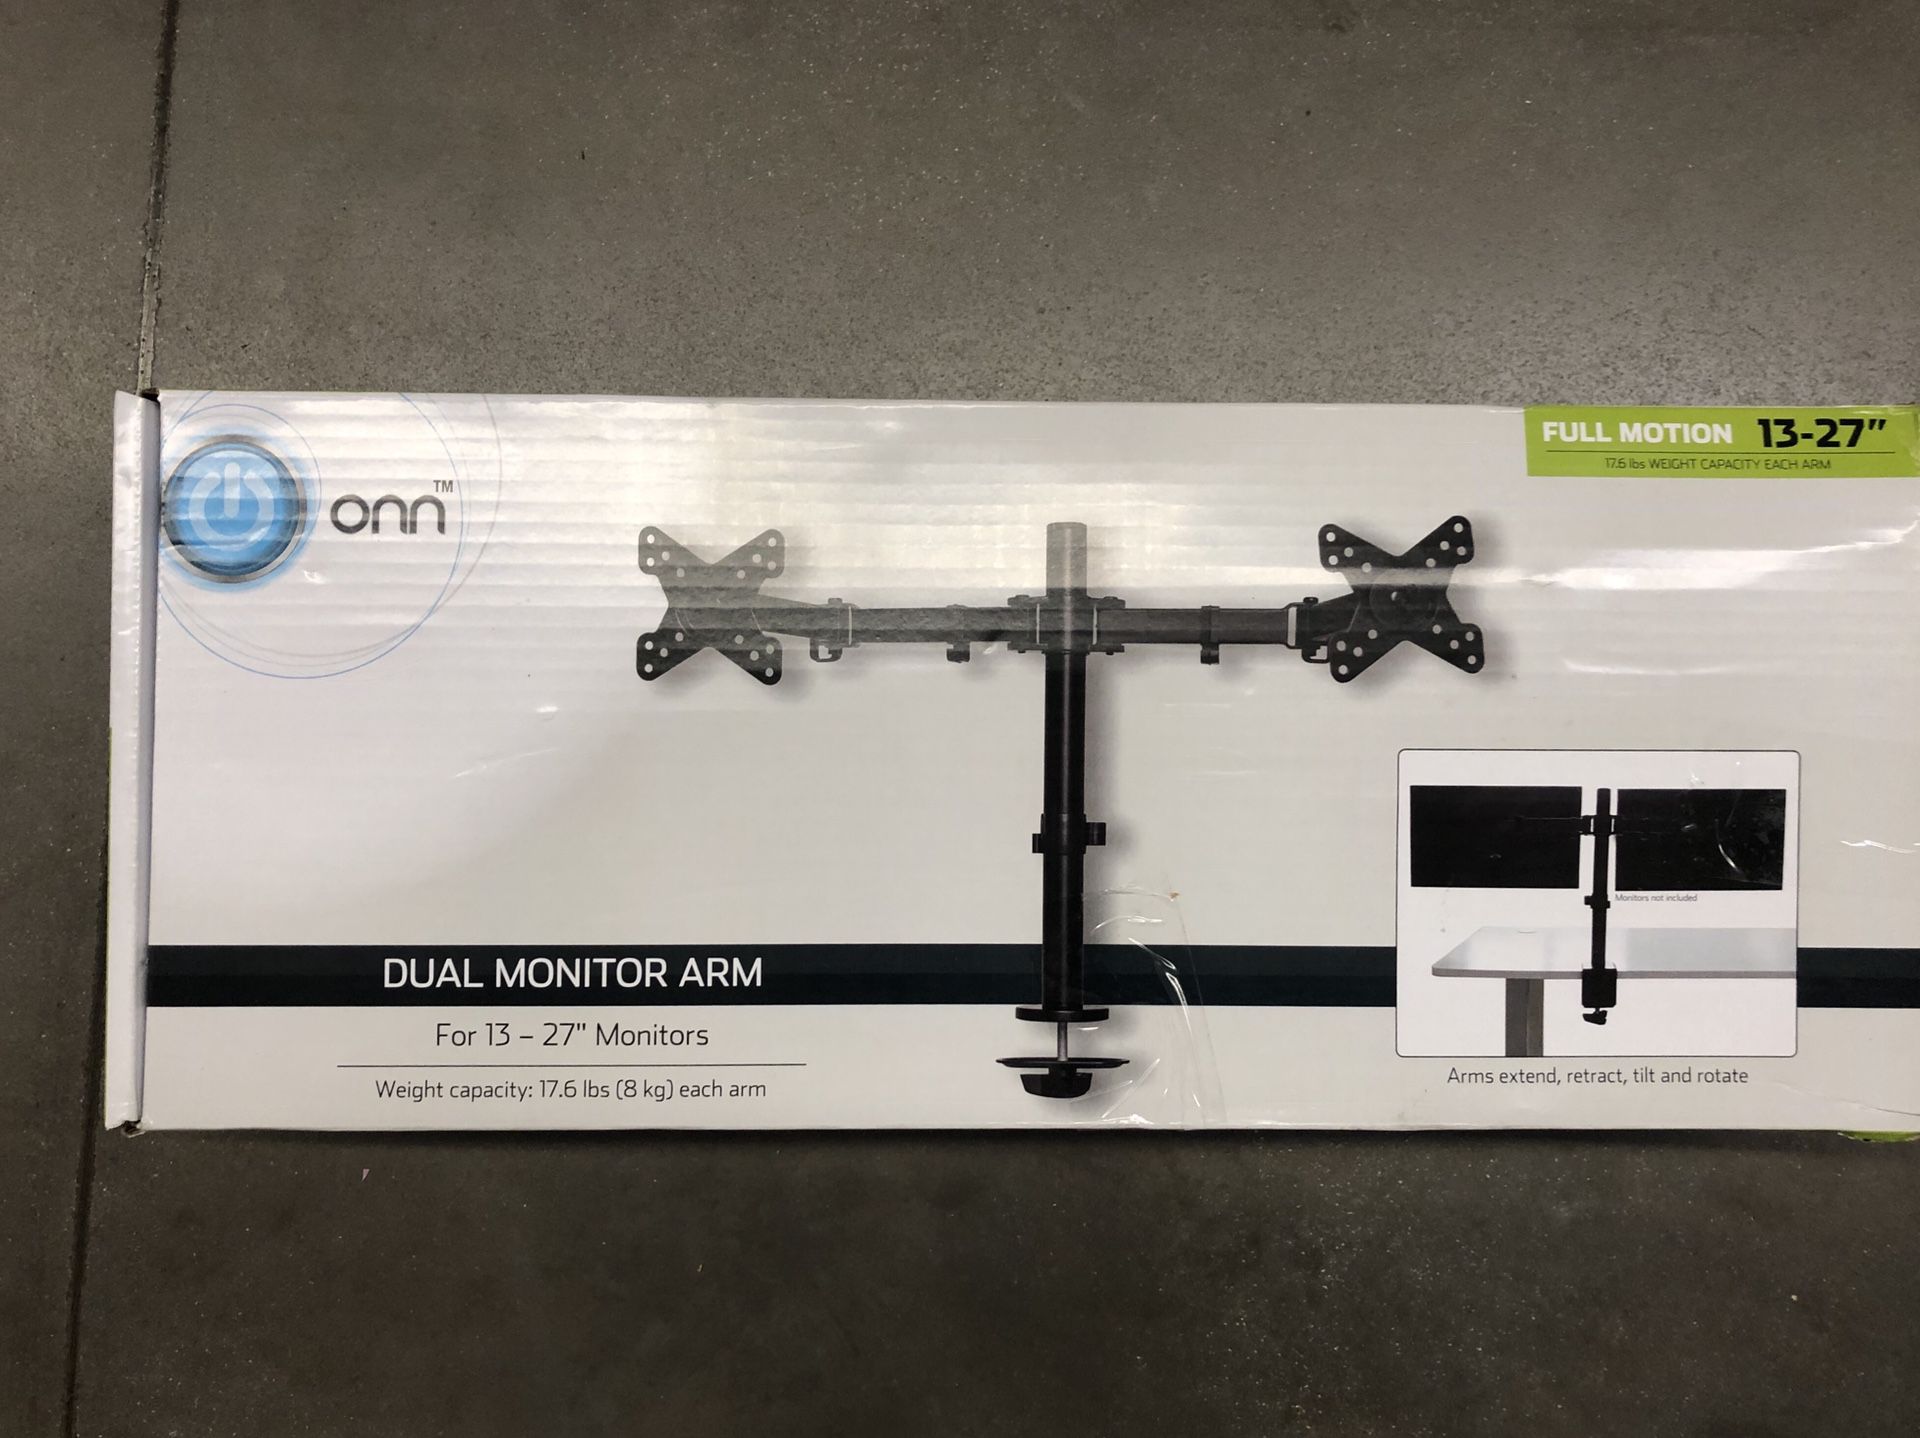 Dual Monitor Arm for 13-27” Monitors